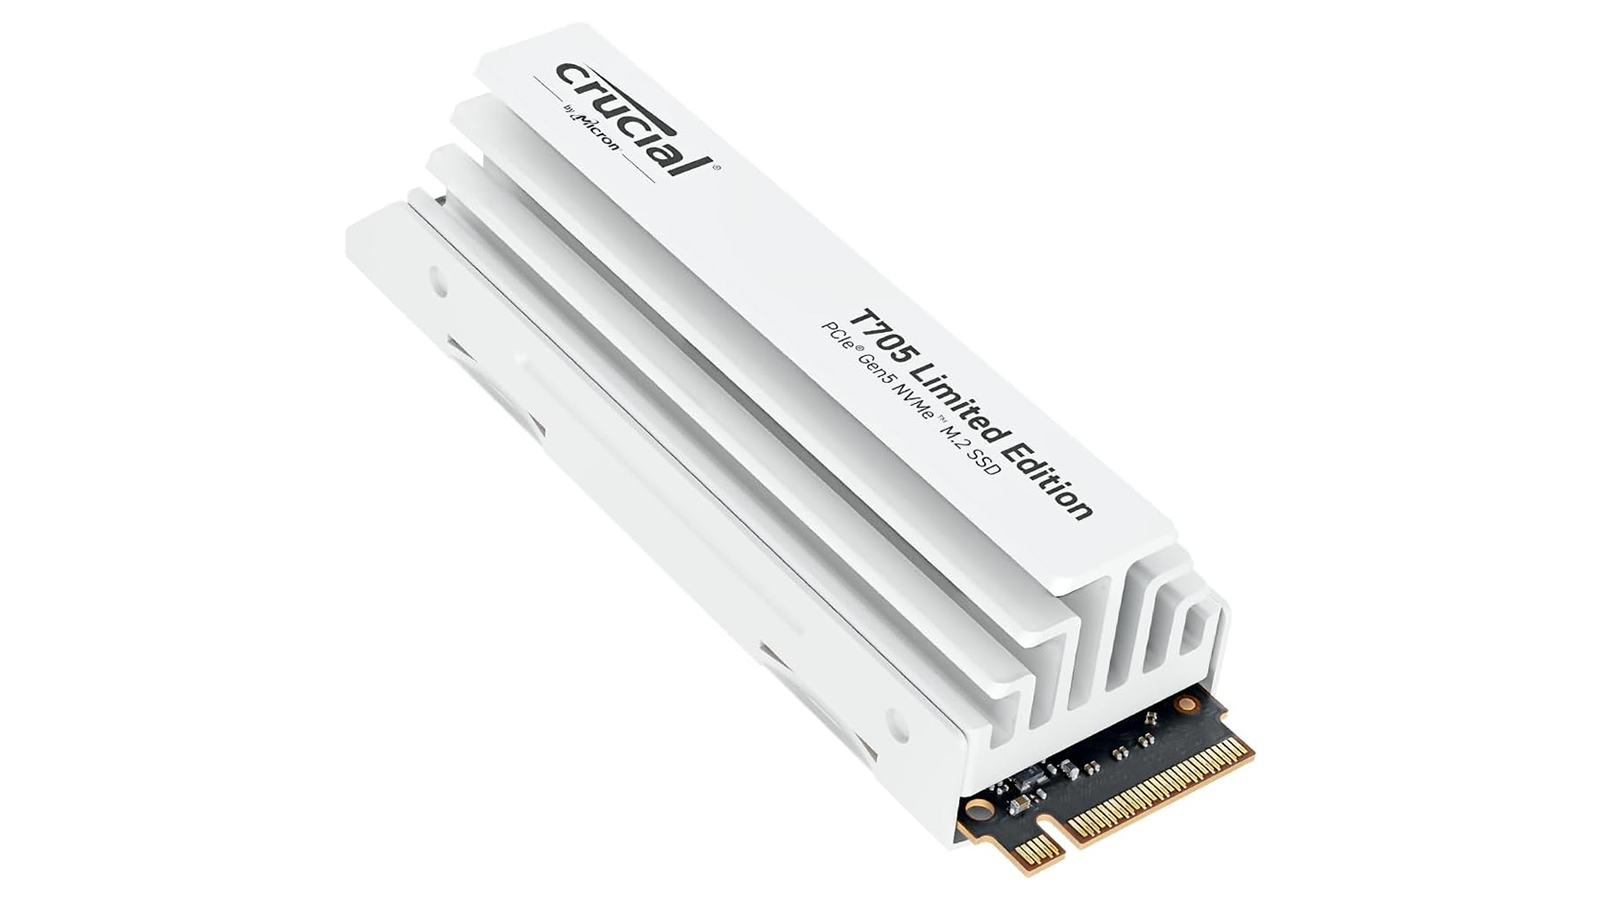 Crucial has just launched its fastest PCIe 5.0 SSD, the 14.5 GB/s T705